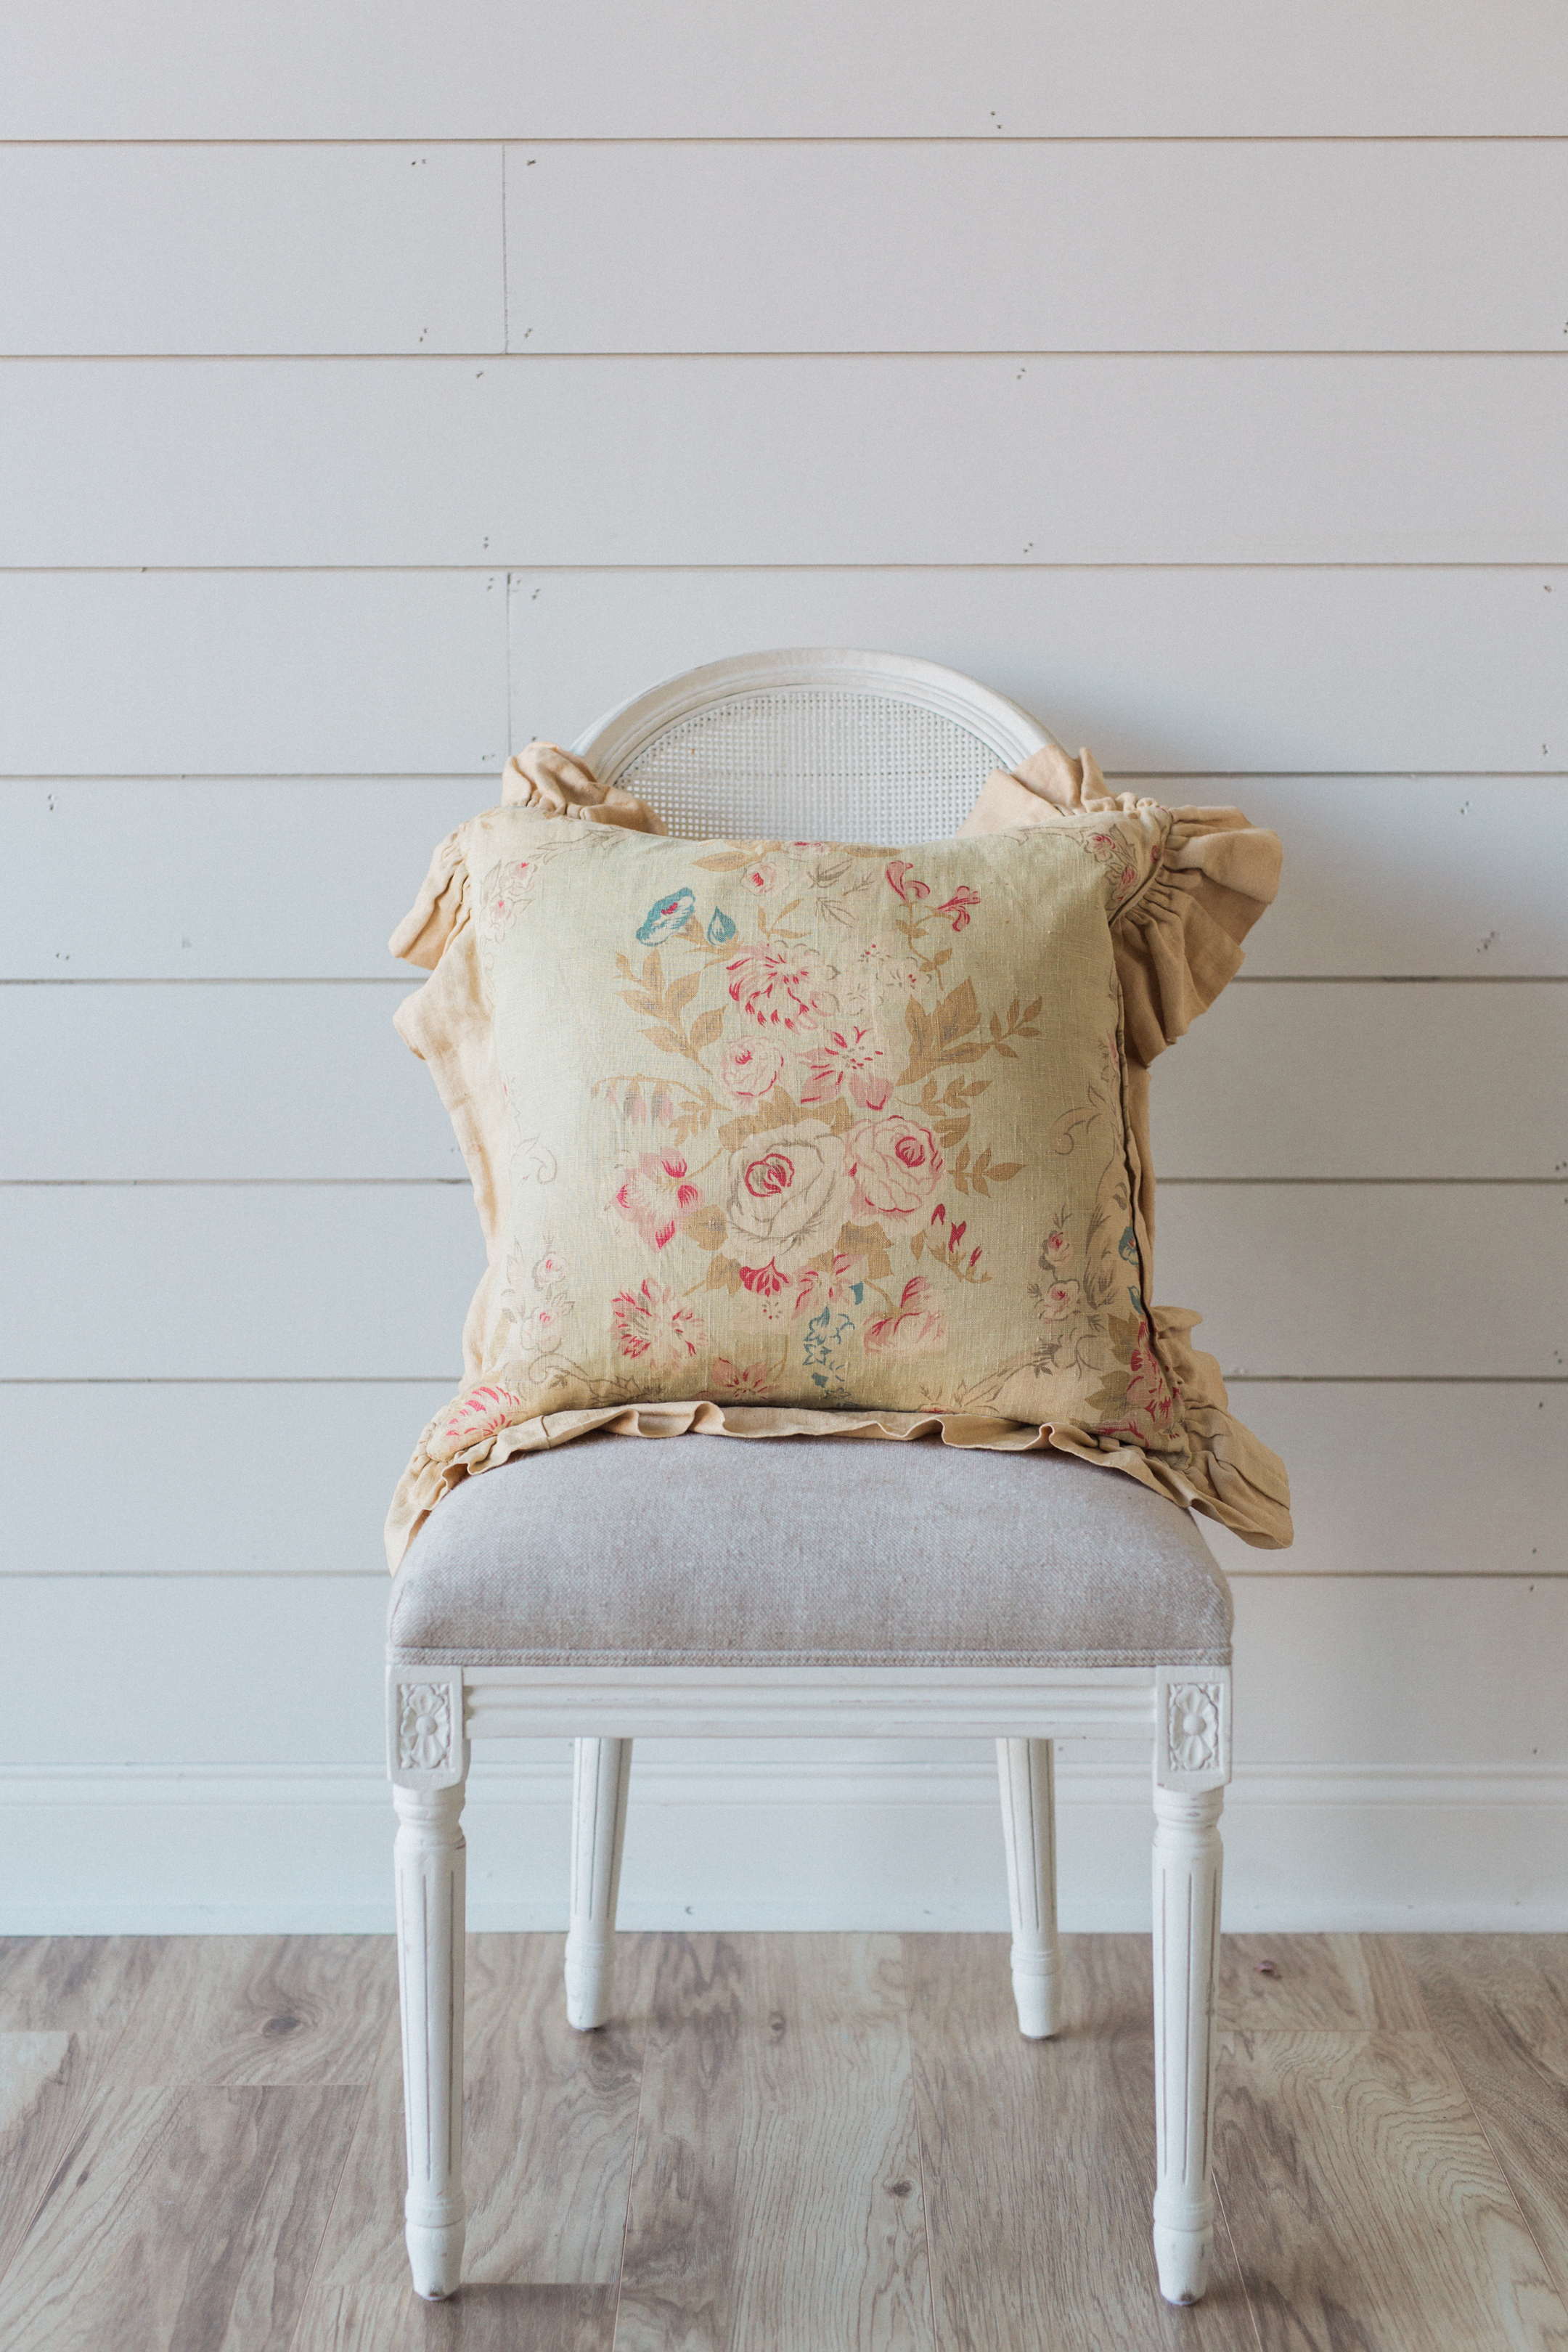 Pillows + Throws + Rugs, Cottage Floral Pillow